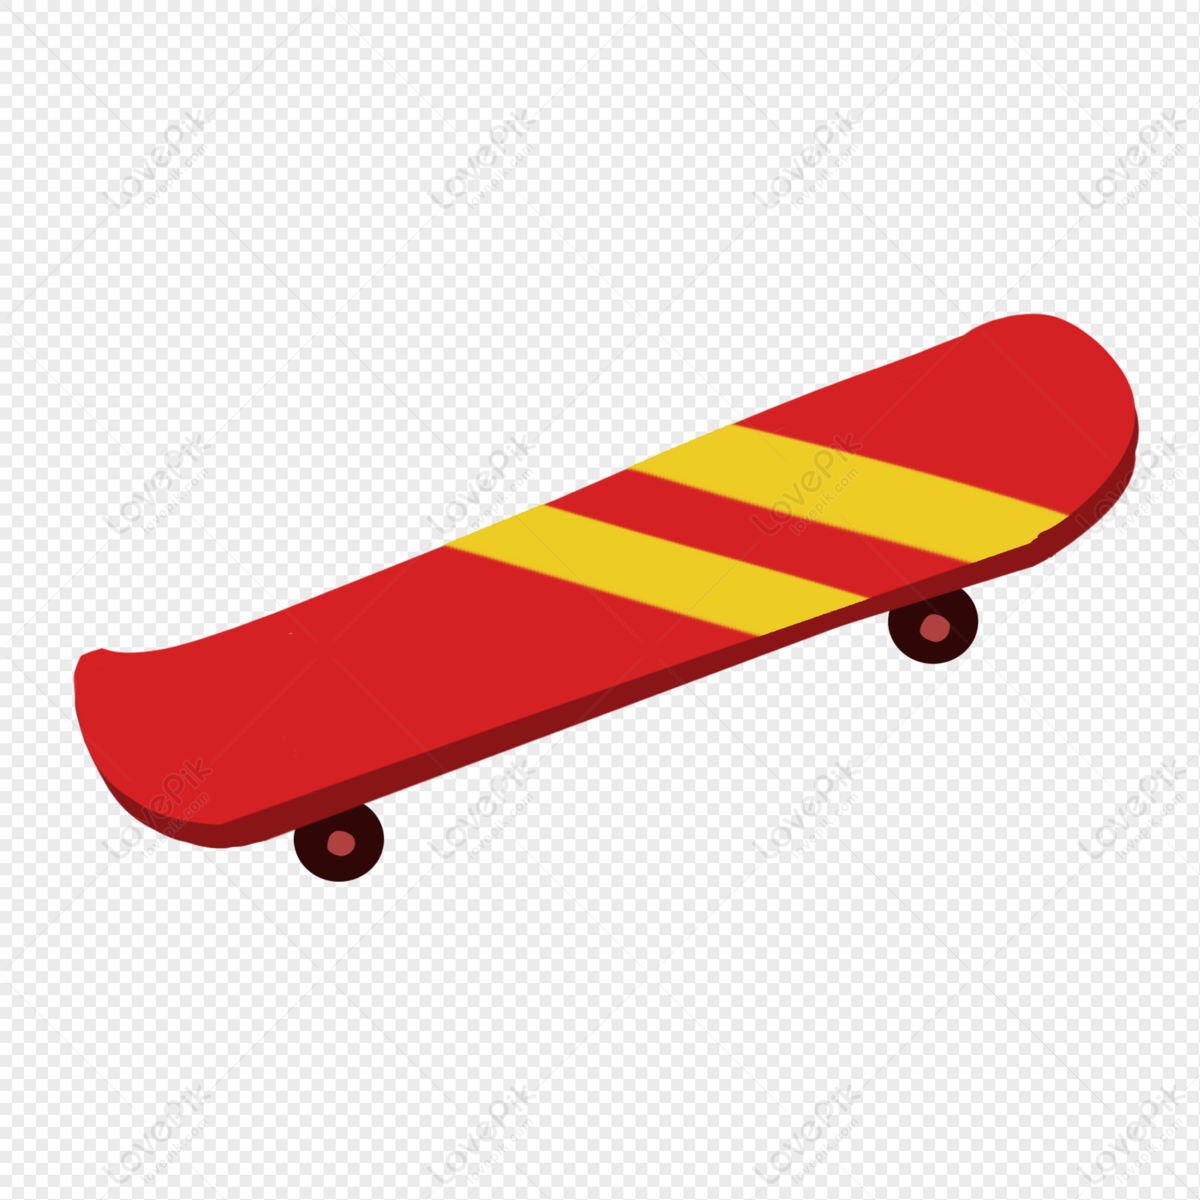 Skateboard PNG Transparent And Clipart Image For Free Download - Lovepik |  401356796